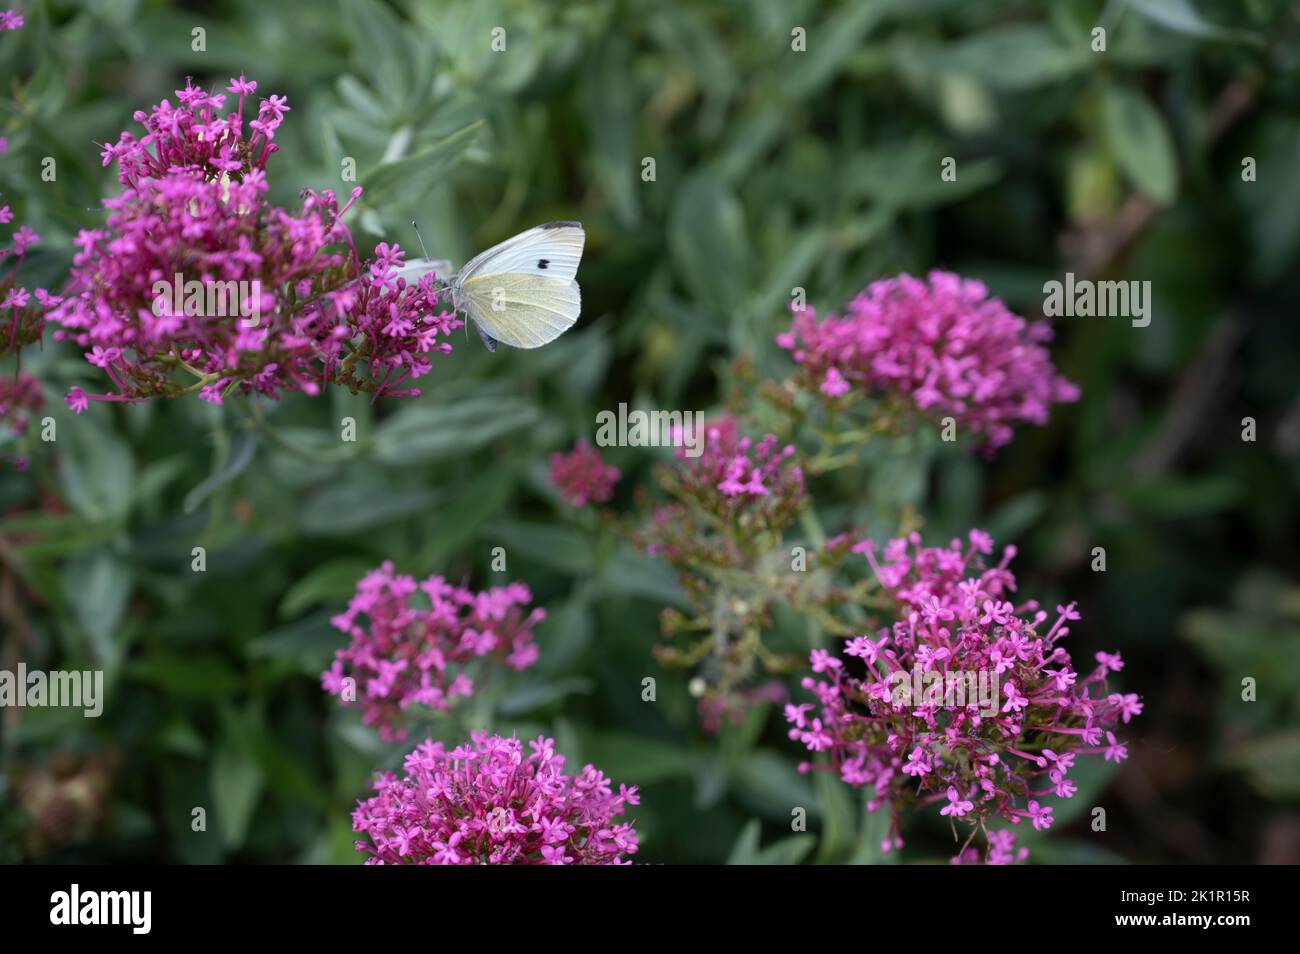 Wales, Pembrokeshire. Dale village. Pink valerian flowers with cabbage white butterfly. Stock Photo